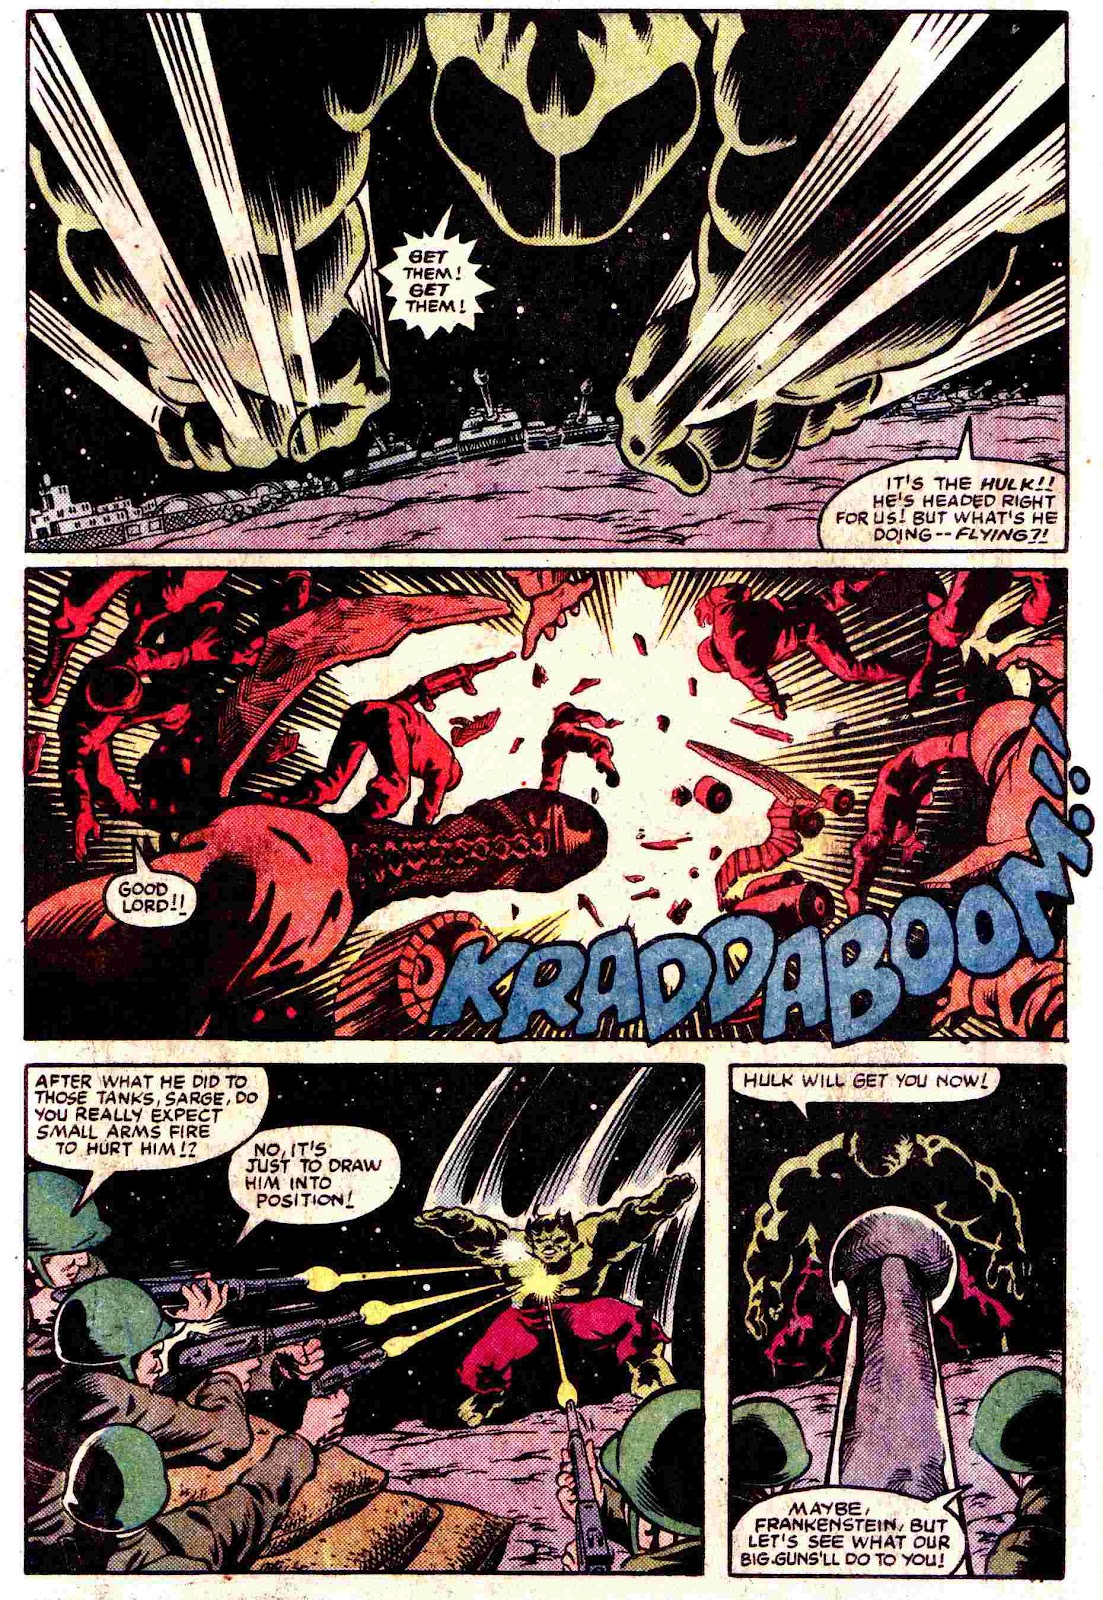 What If? (1977) issue 45 - The Hulk went Berserk - Page 13